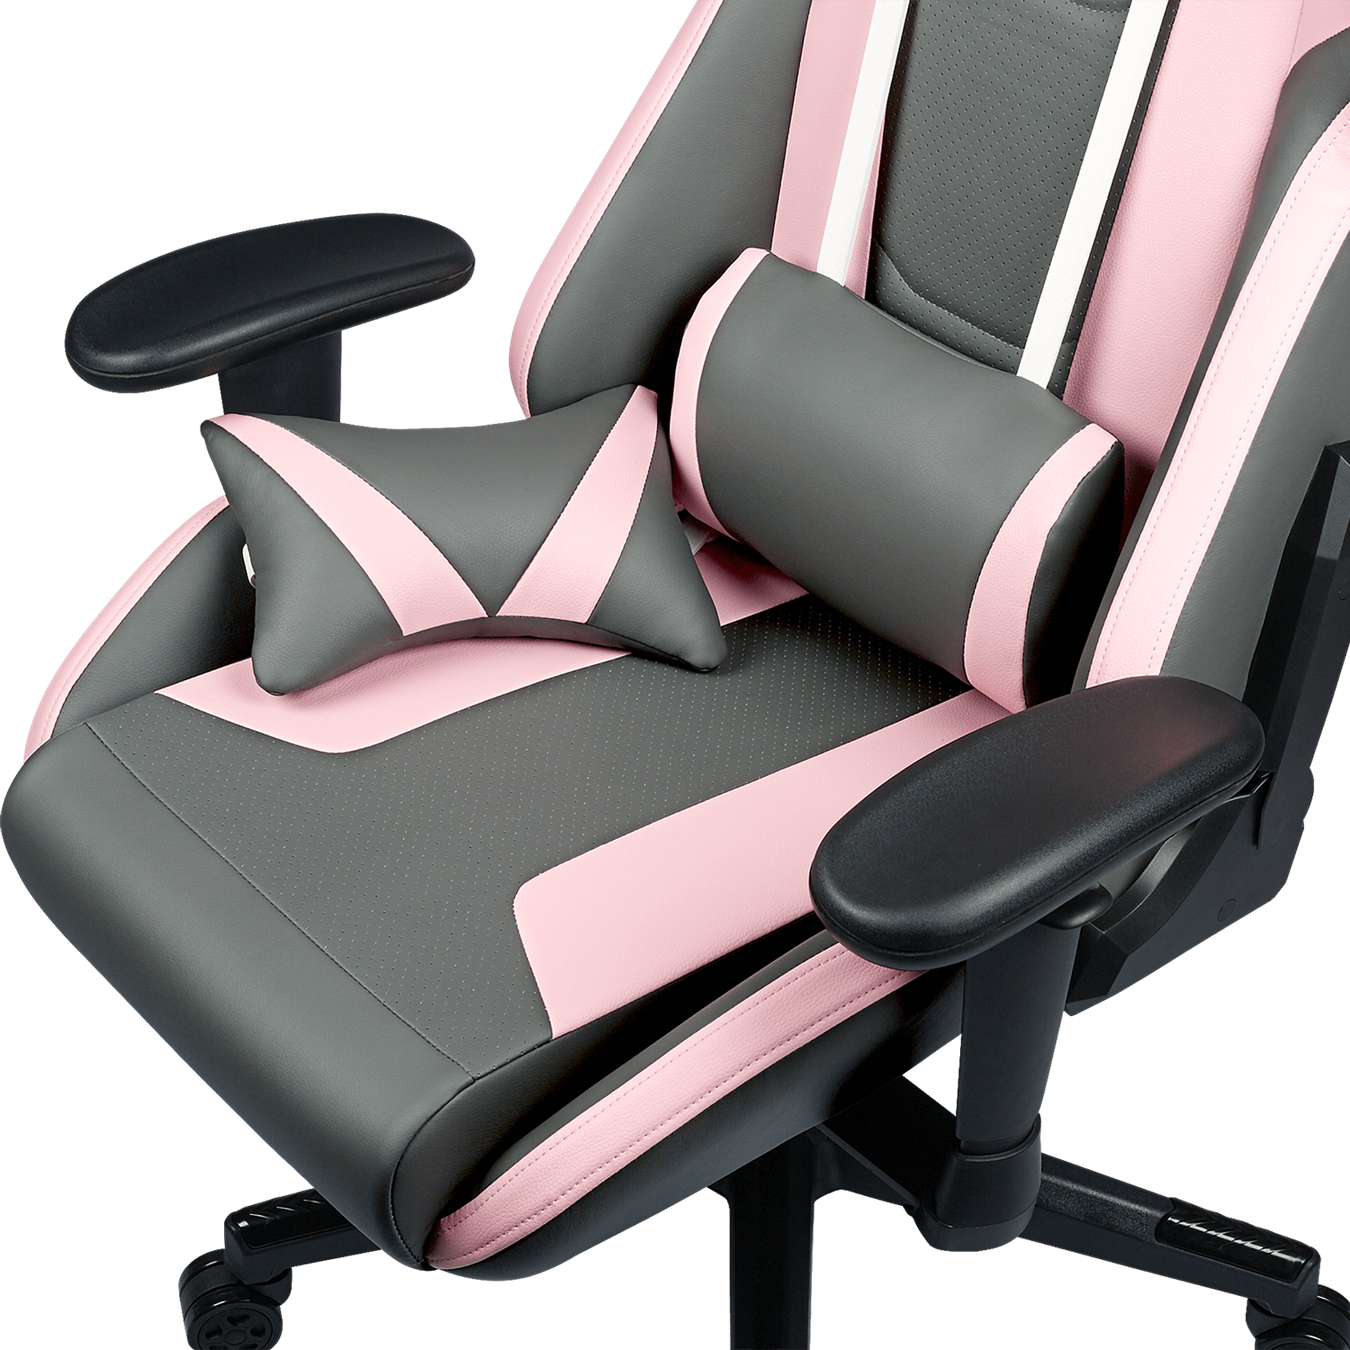 Caliber R1S Rose Grey Edition Gaming Chair - The perfect combo to help alleviate neck strain and support your lower back.